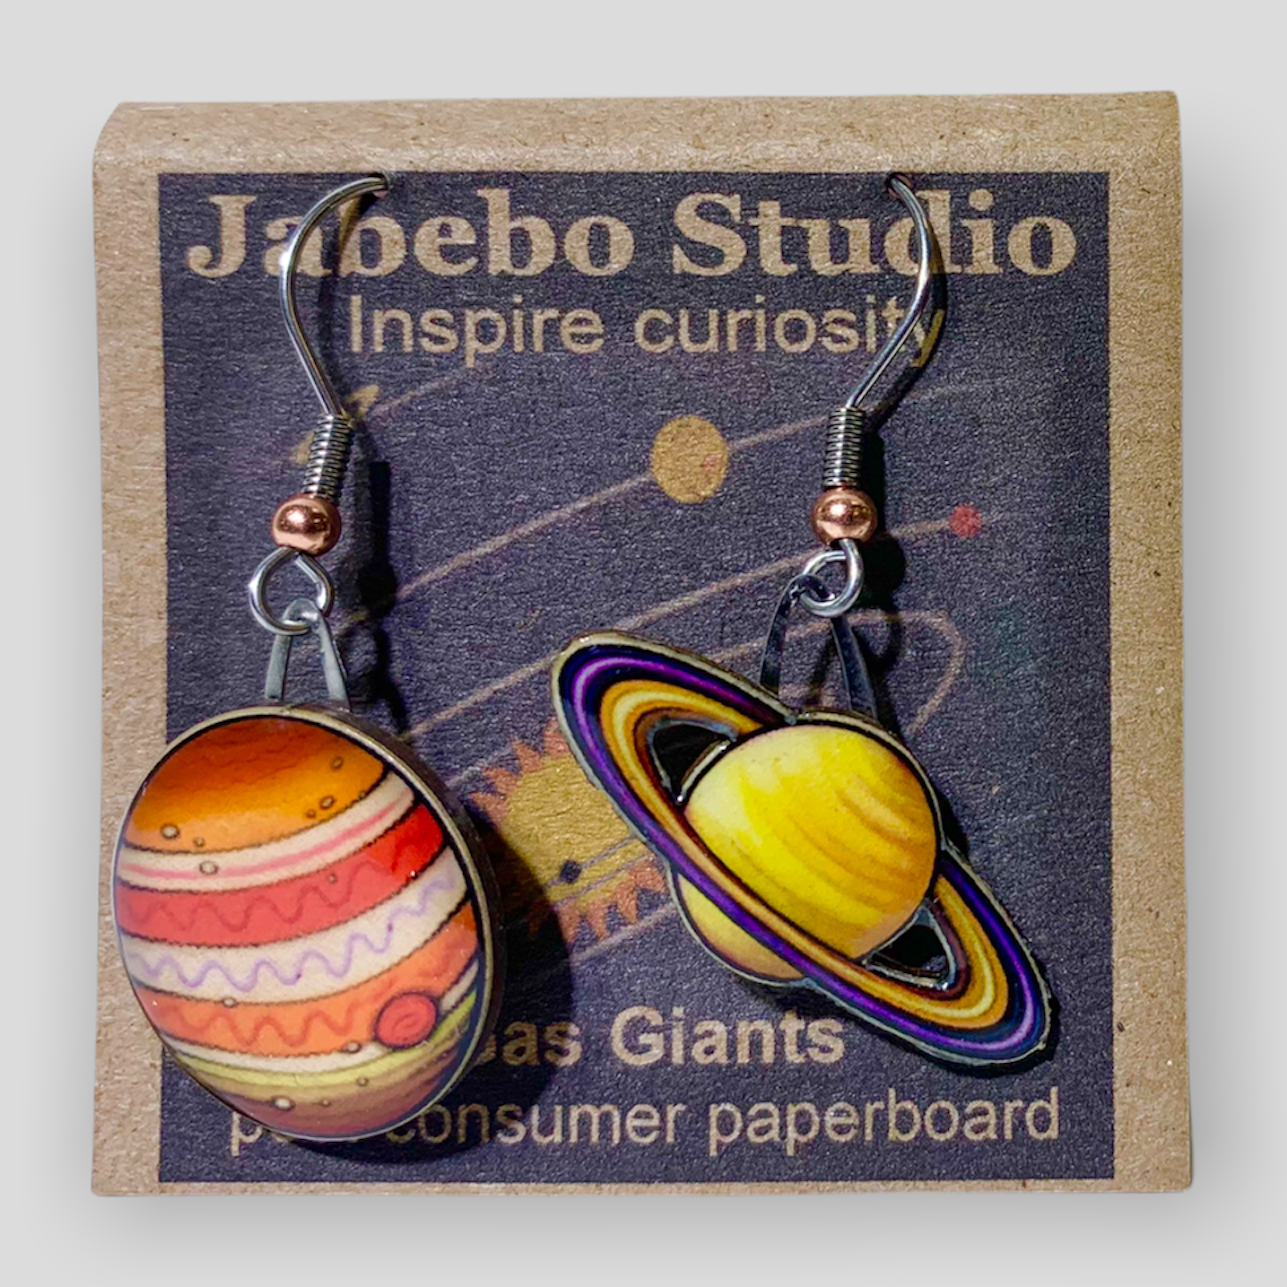 Picture shown is of 1 inch tall pair of earrings of Gas Giants.